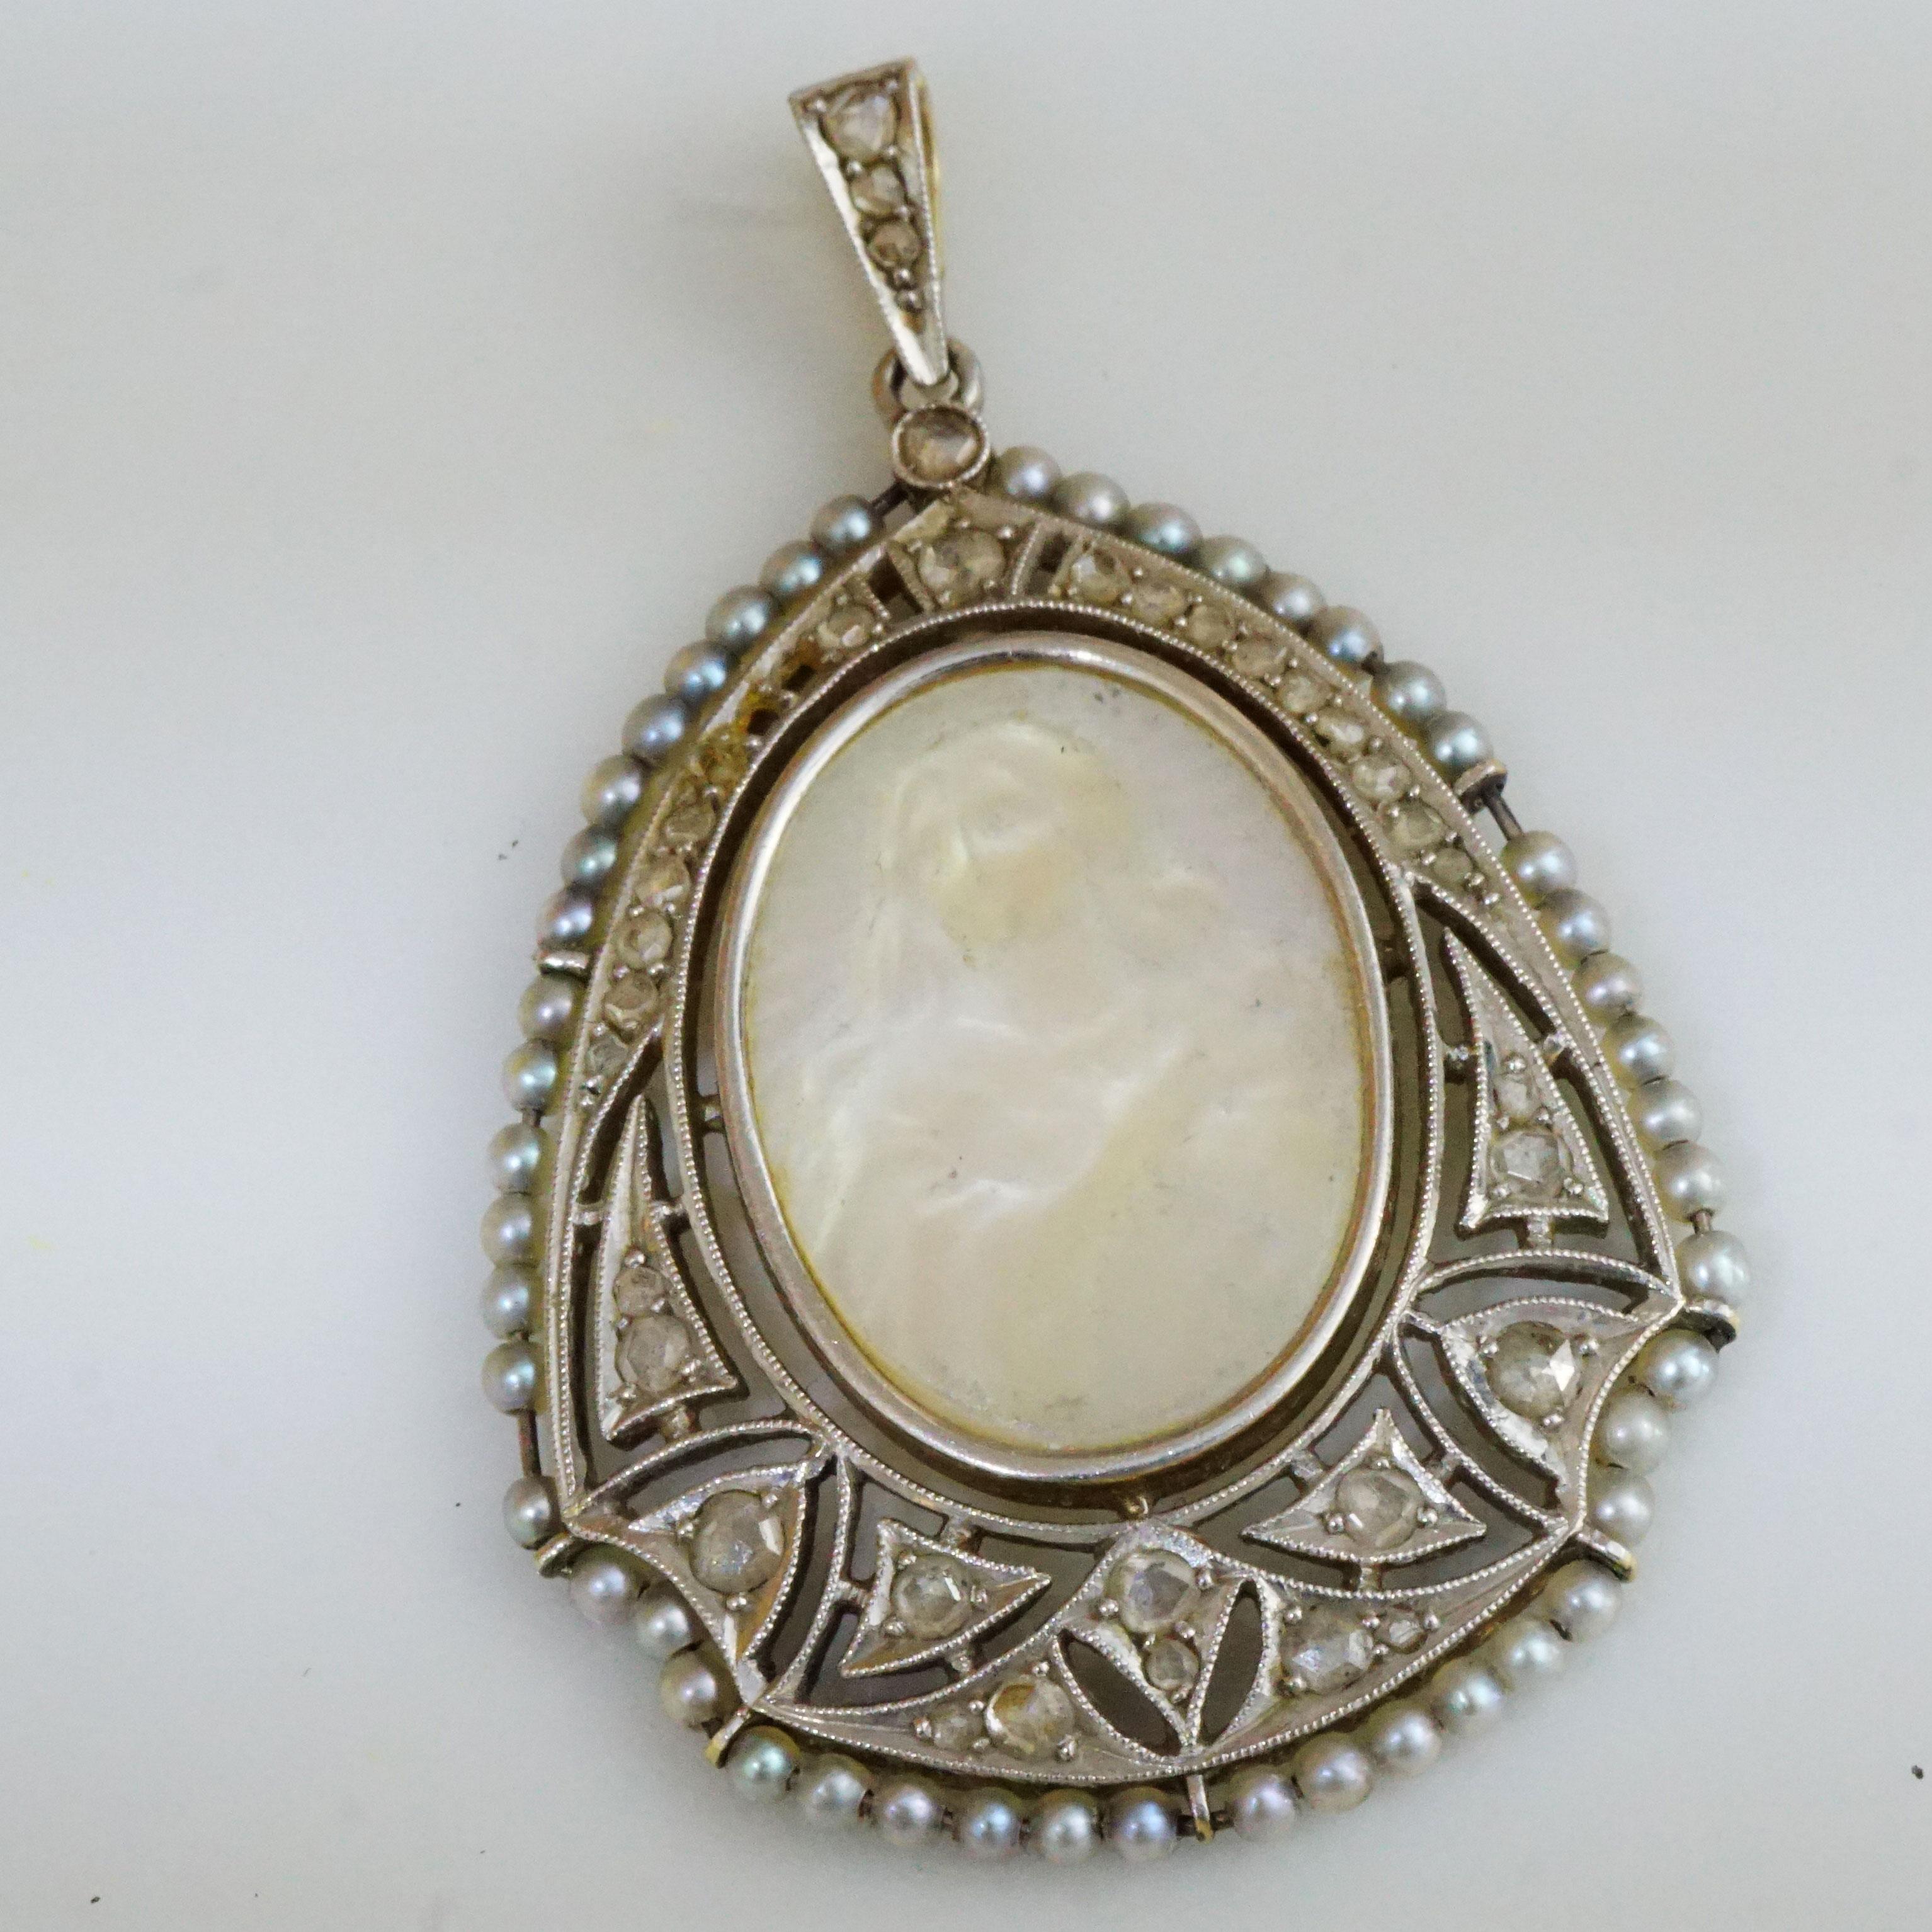 Rose Cut Original Art Nouveau Pendant in Platinum Yellow Gold around 1920 Shadowy Madonna For Sale